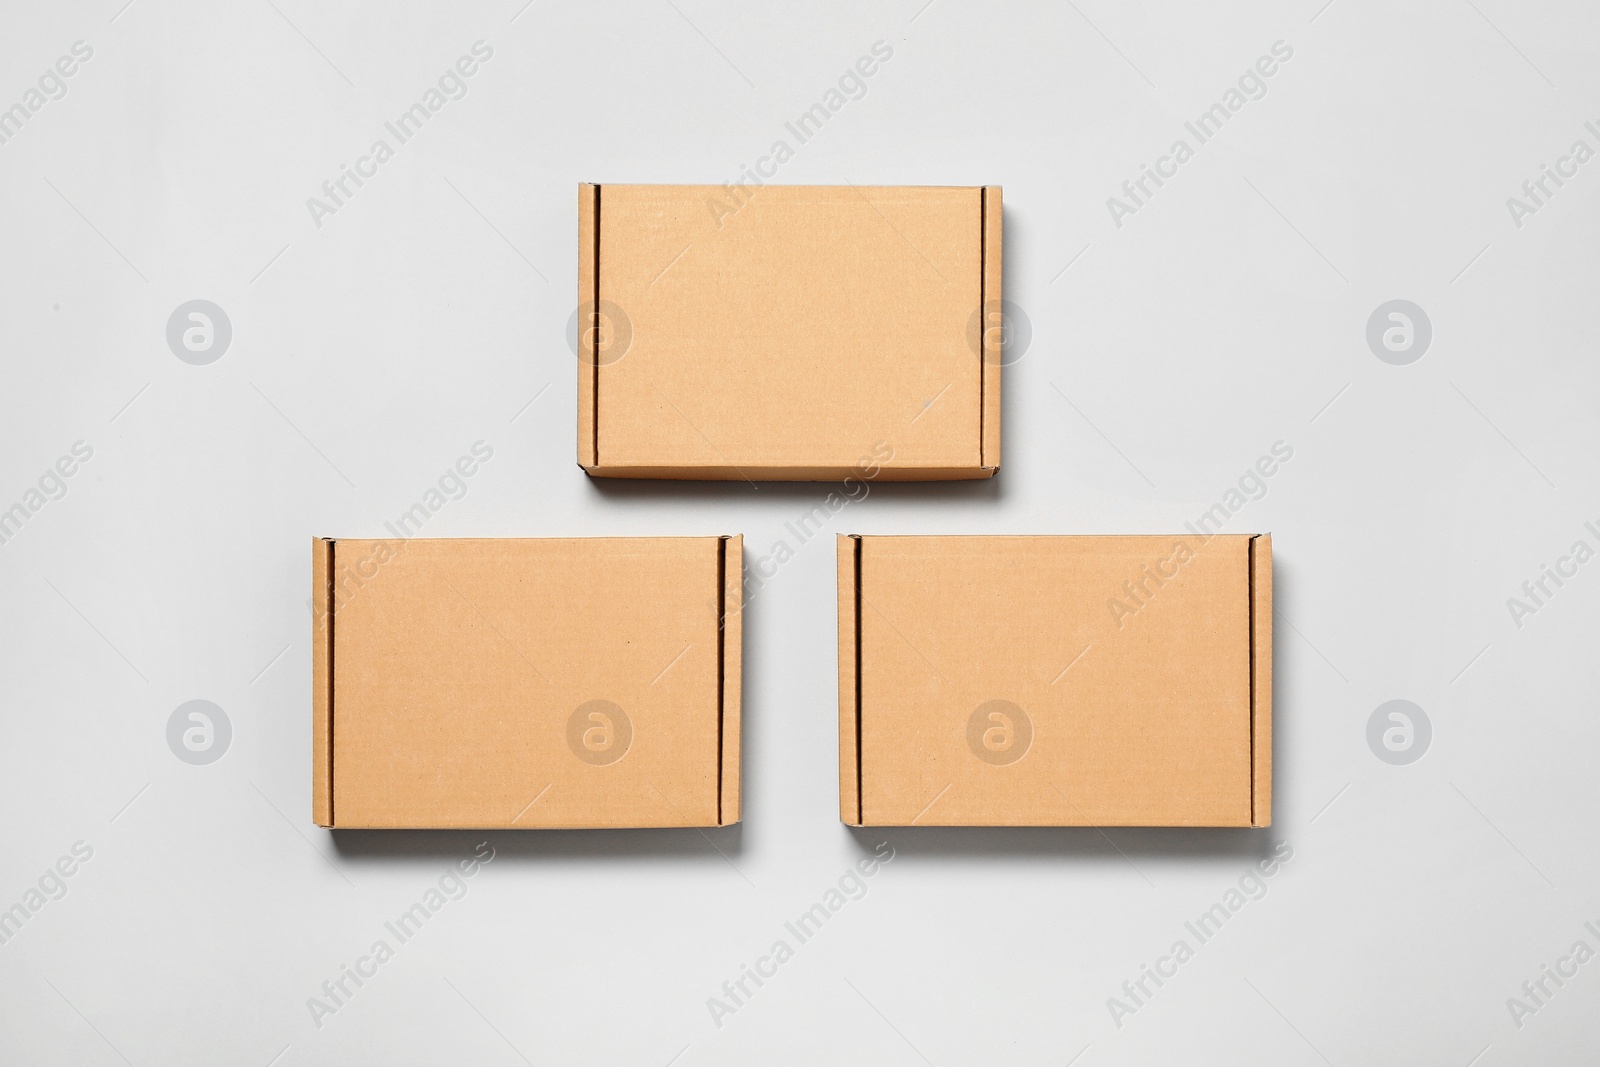 Photo of Cardboard boxes on white background, flat lay. Packaging goods